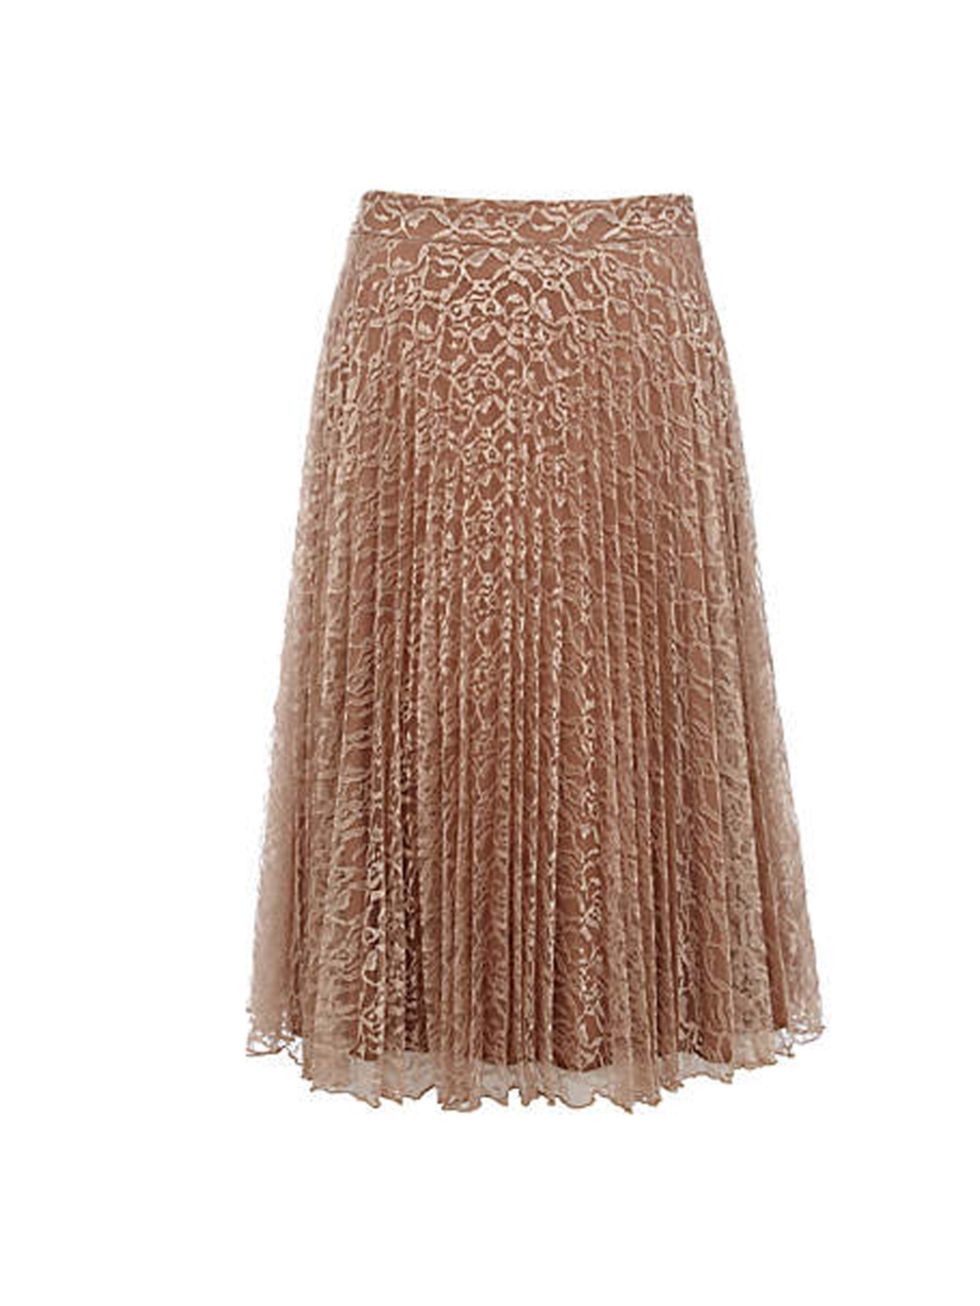 <p>From the office to party to the Christmas day lunch,. This River Island skirt is a cheap and on-trend wardrobe updater <a href="http://www.riverisland.com/women/skirts/midi-skirts/Beige-lace-pleated-midi-skirt-630838">River Island</a> lace pleated ski